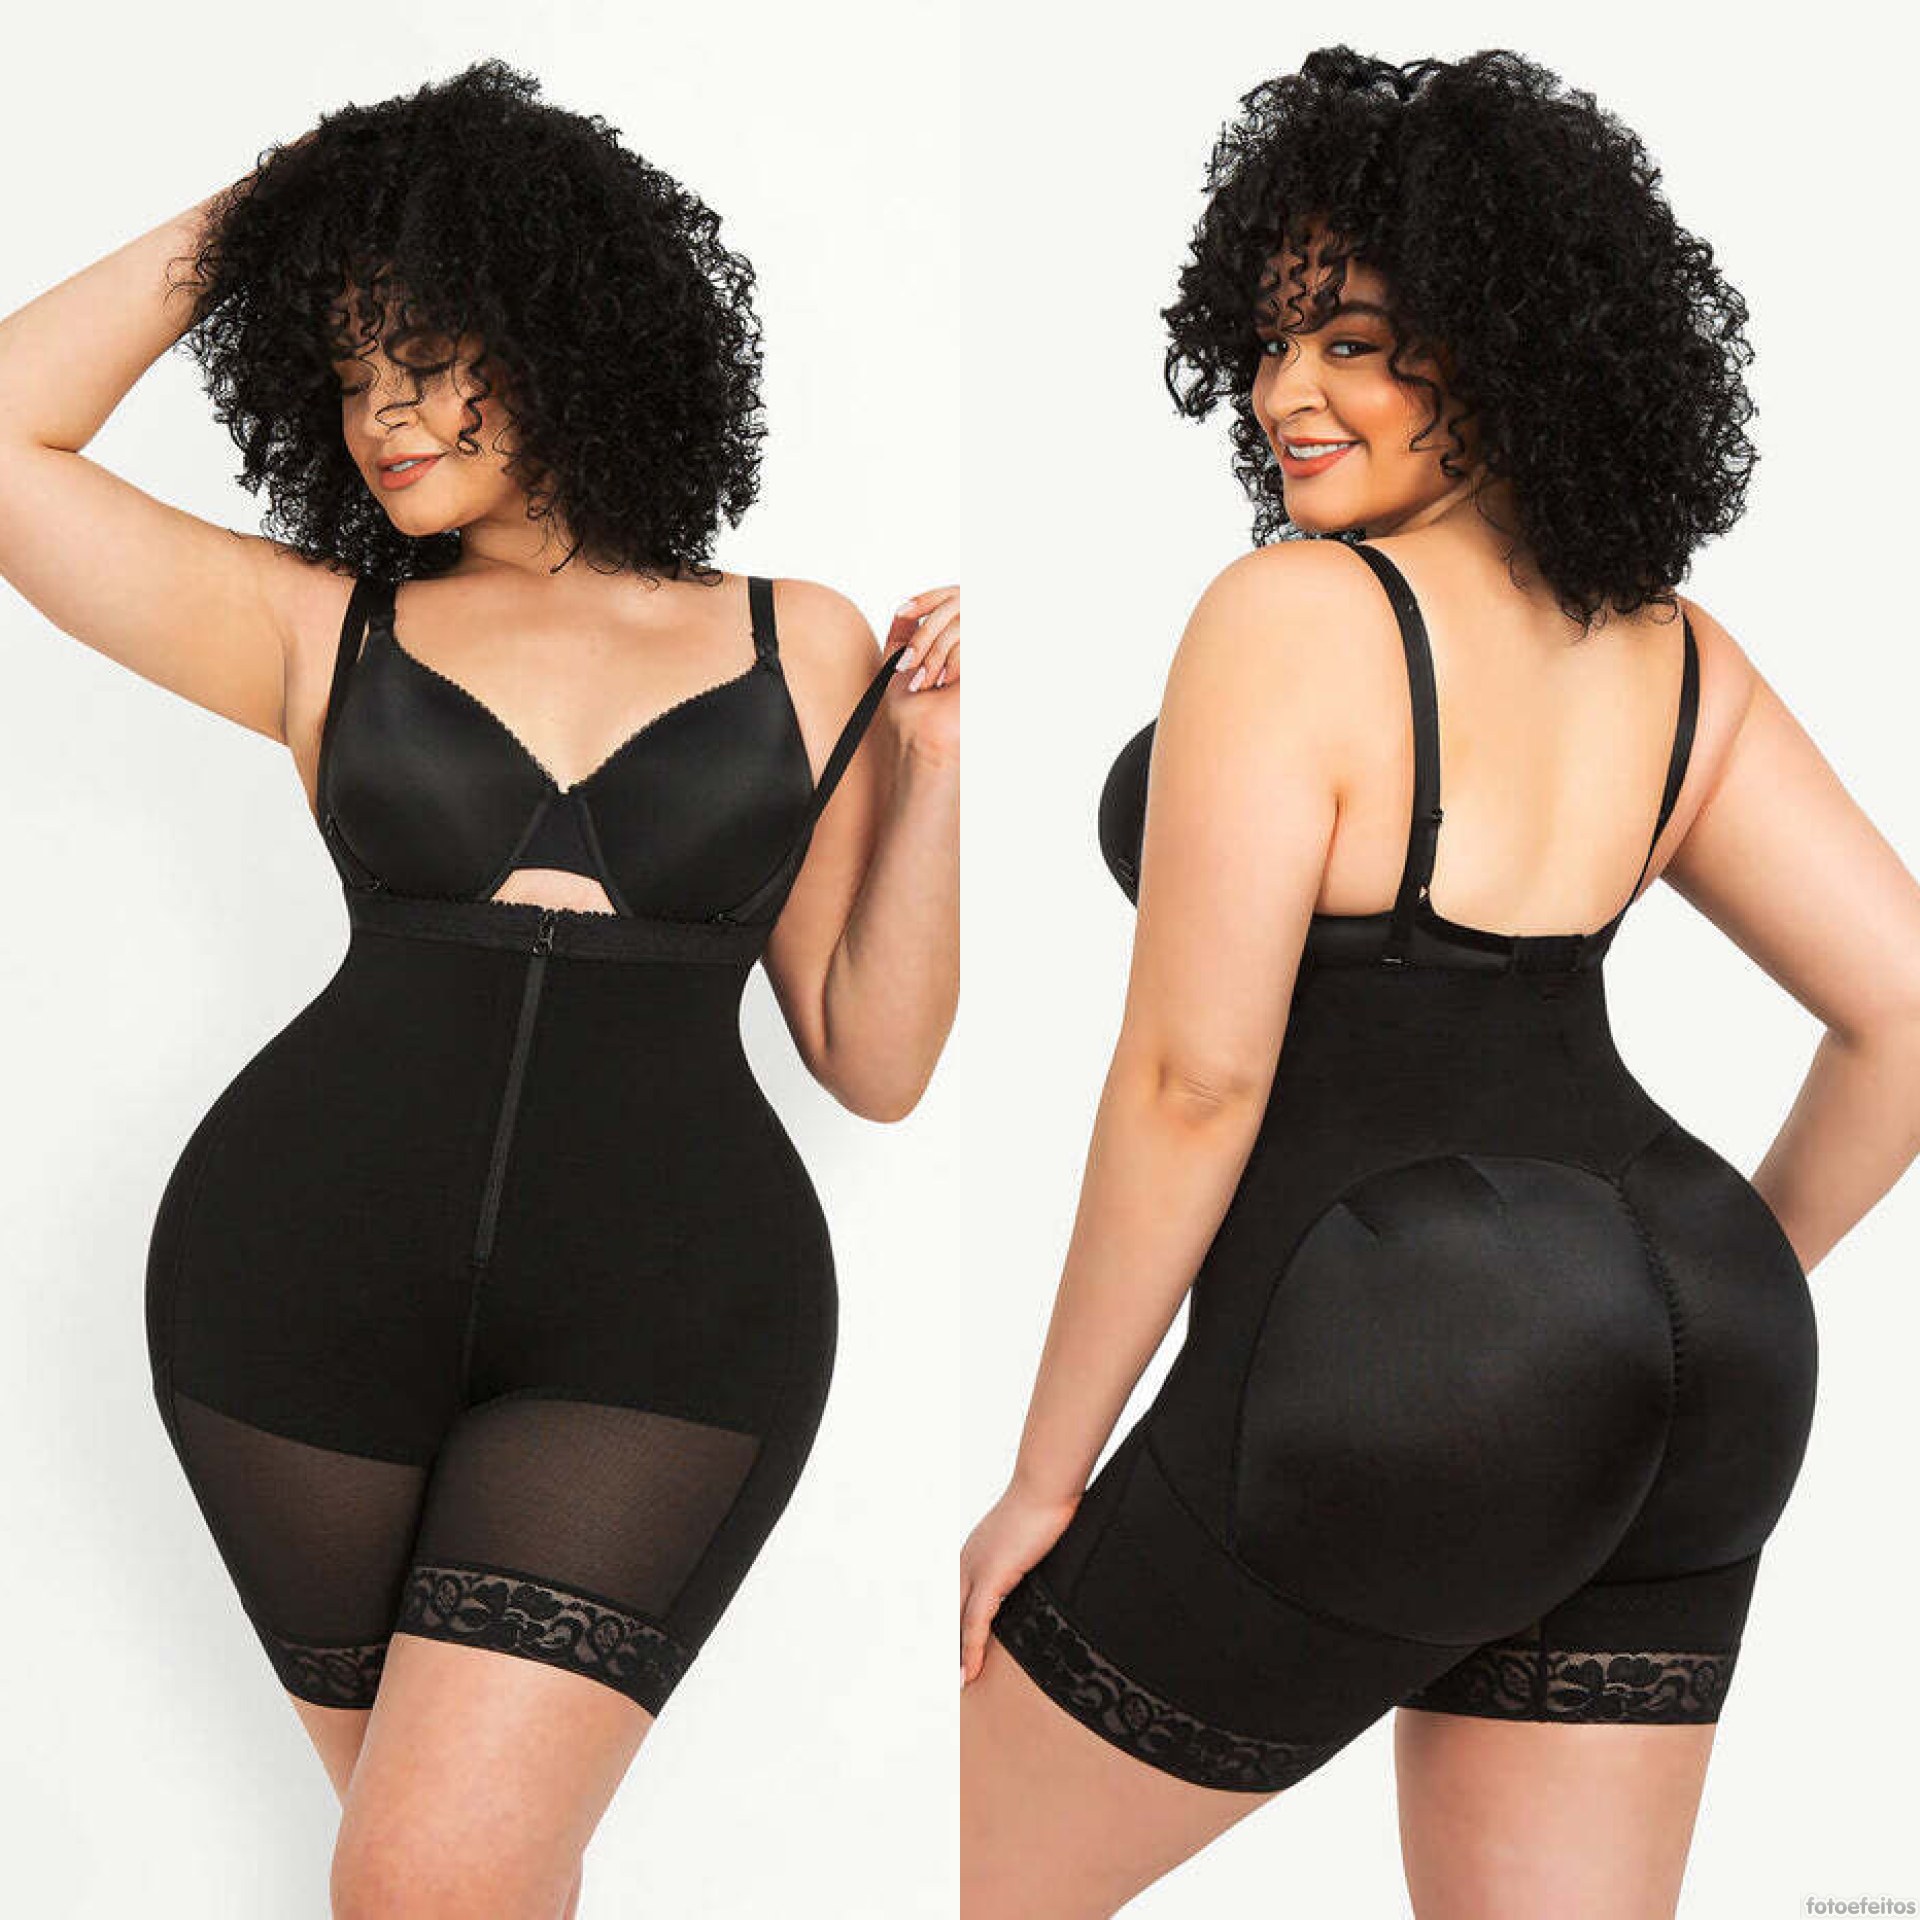 3 tips on how to choose the body shaper - Lucimar Moreira